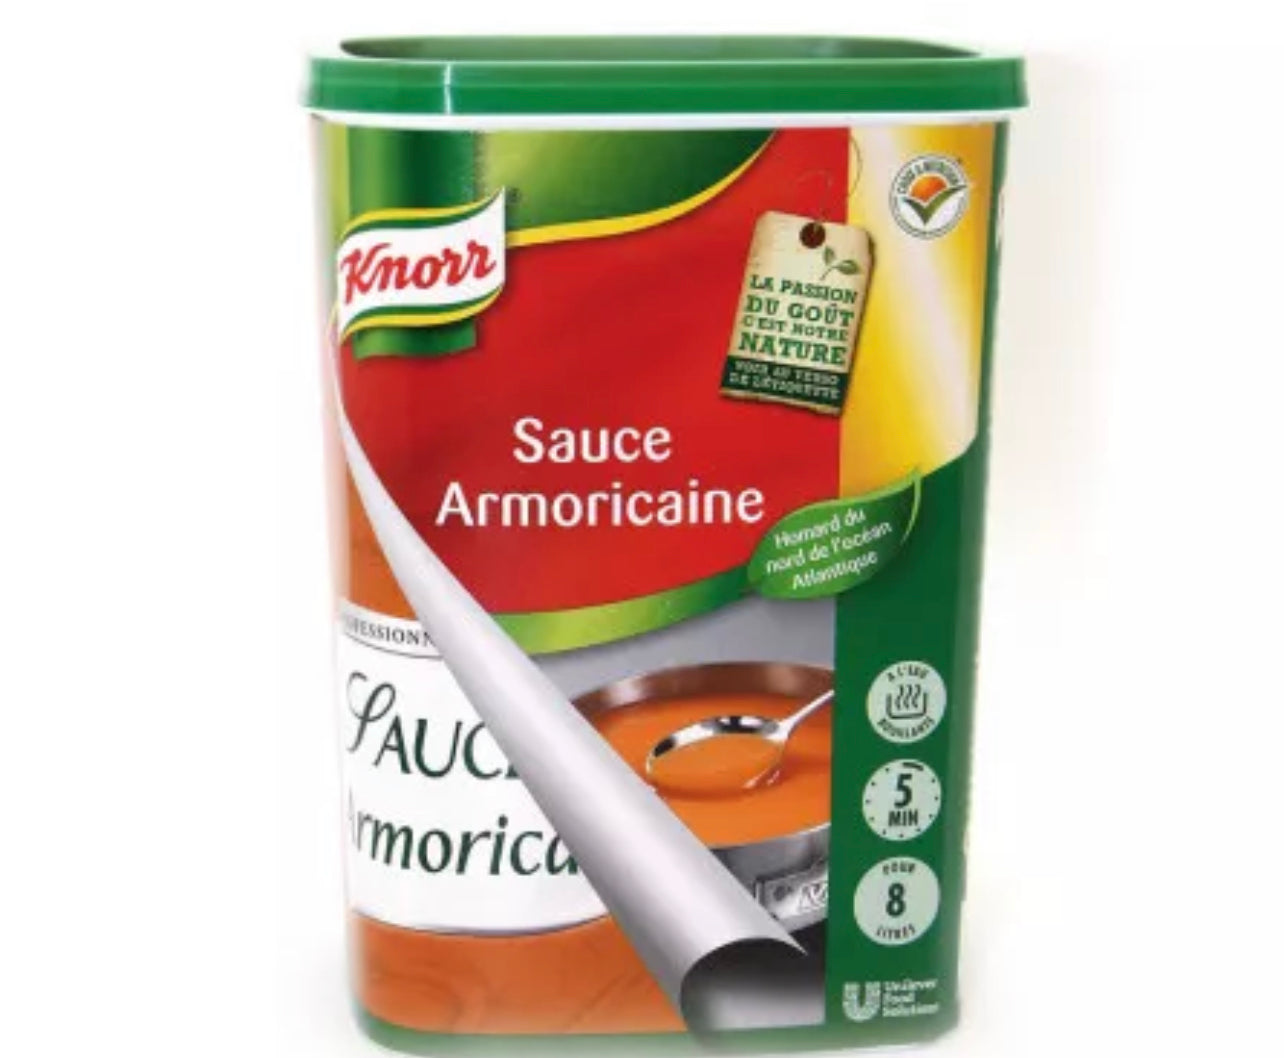 Dehydrated Armorican sauce - 800g